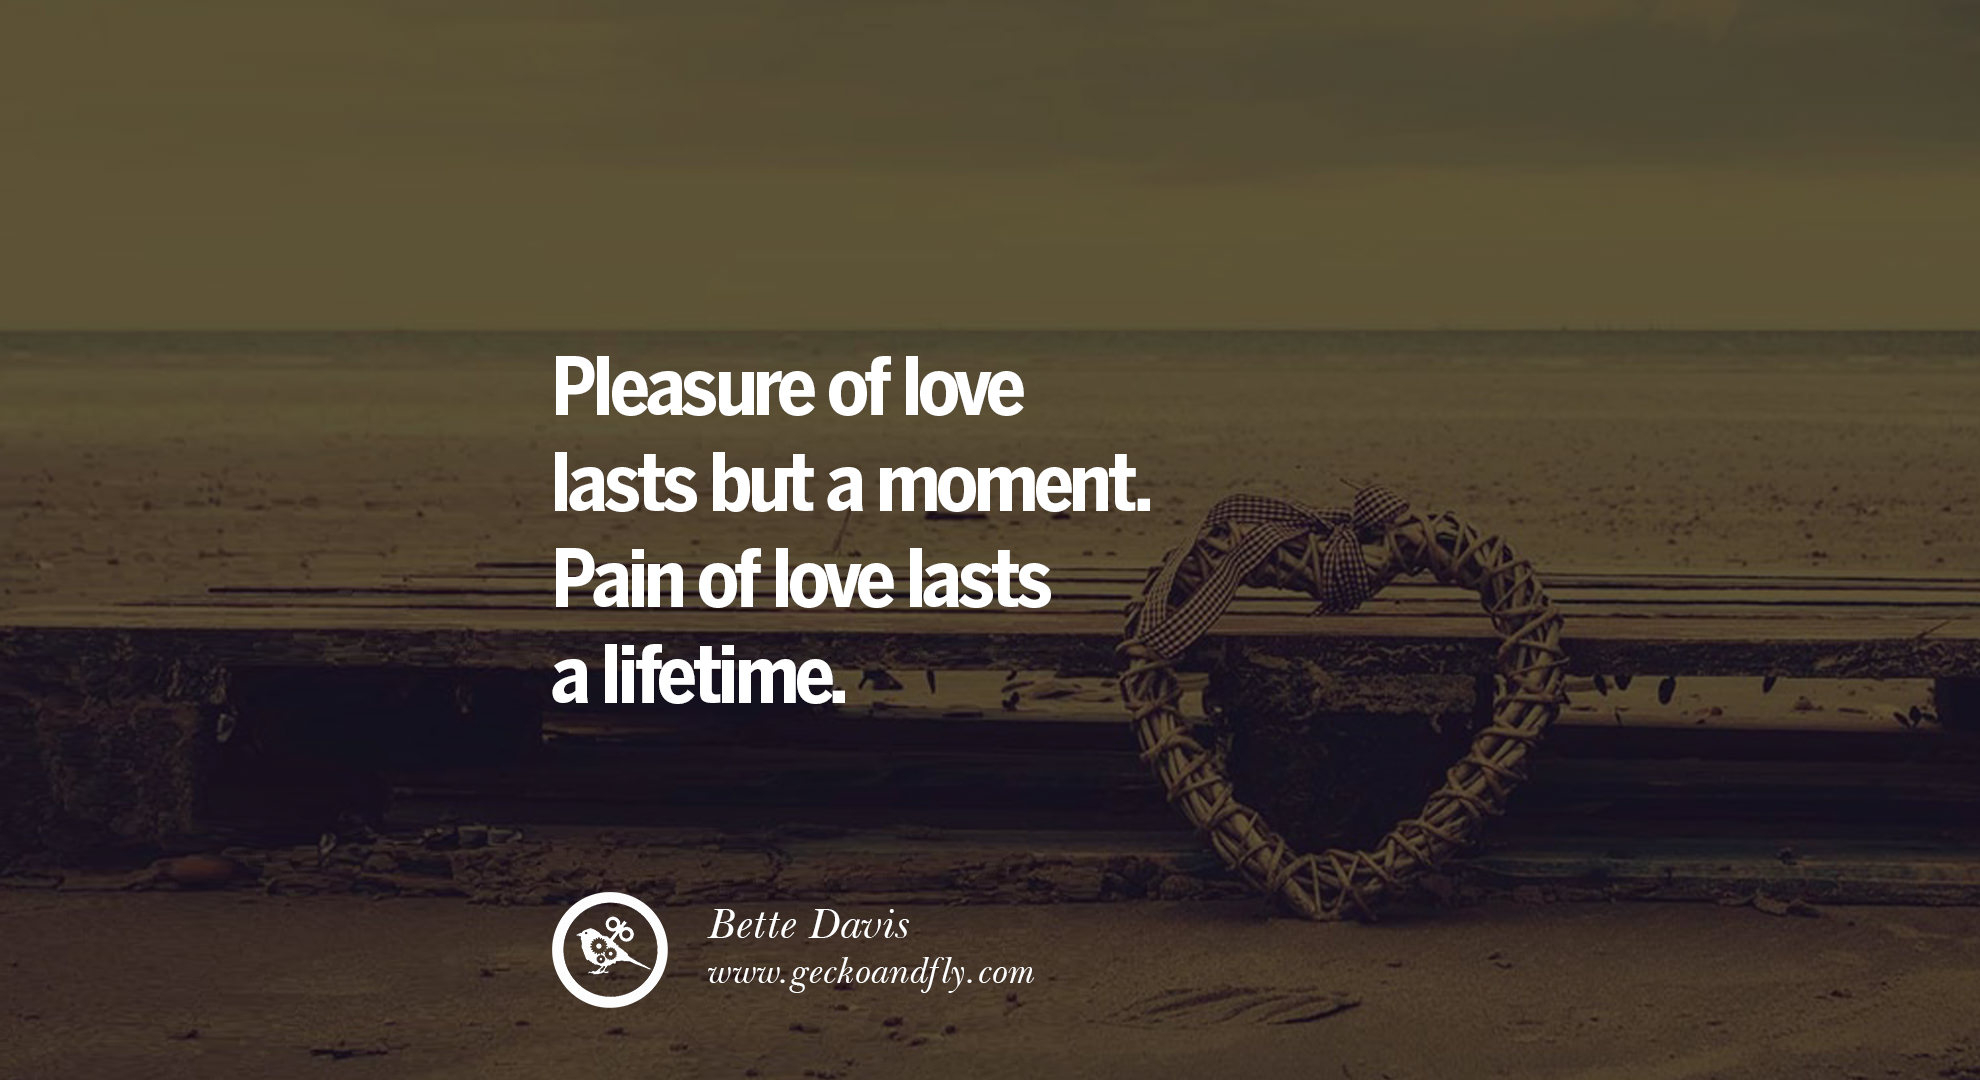 40 Romantic Quotes about Love Life Marriage and Relationships [ Part 2 ]